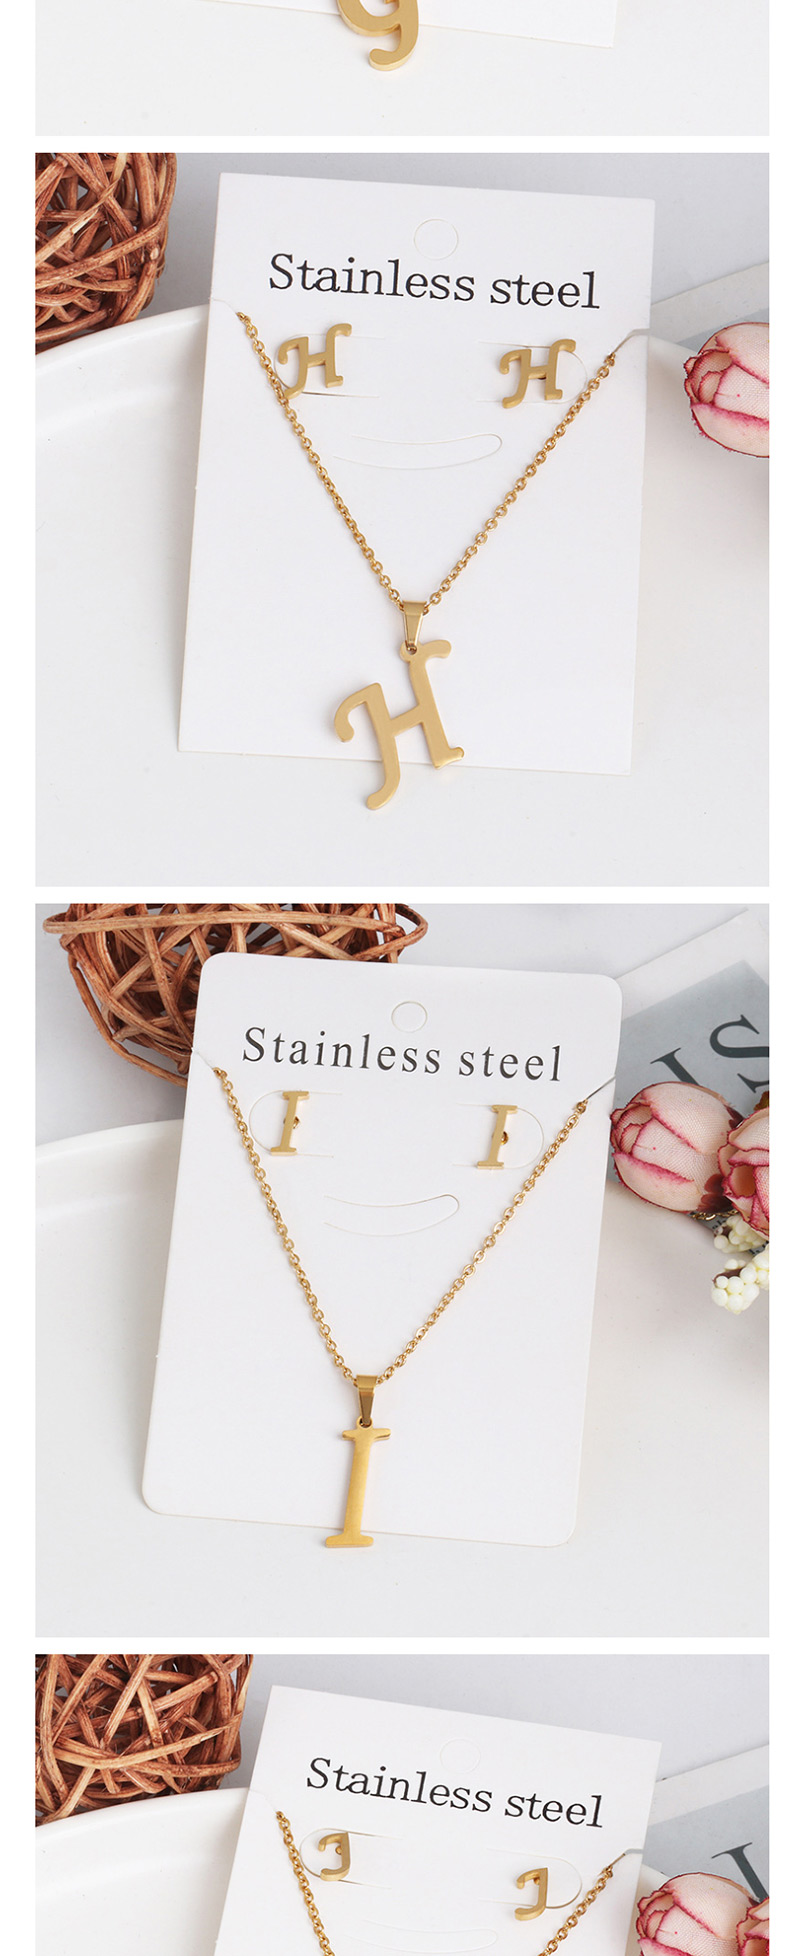 Fashion S Gold Stainless Steel Letter Necklace Earrings Two-piece,Jewelry Sets